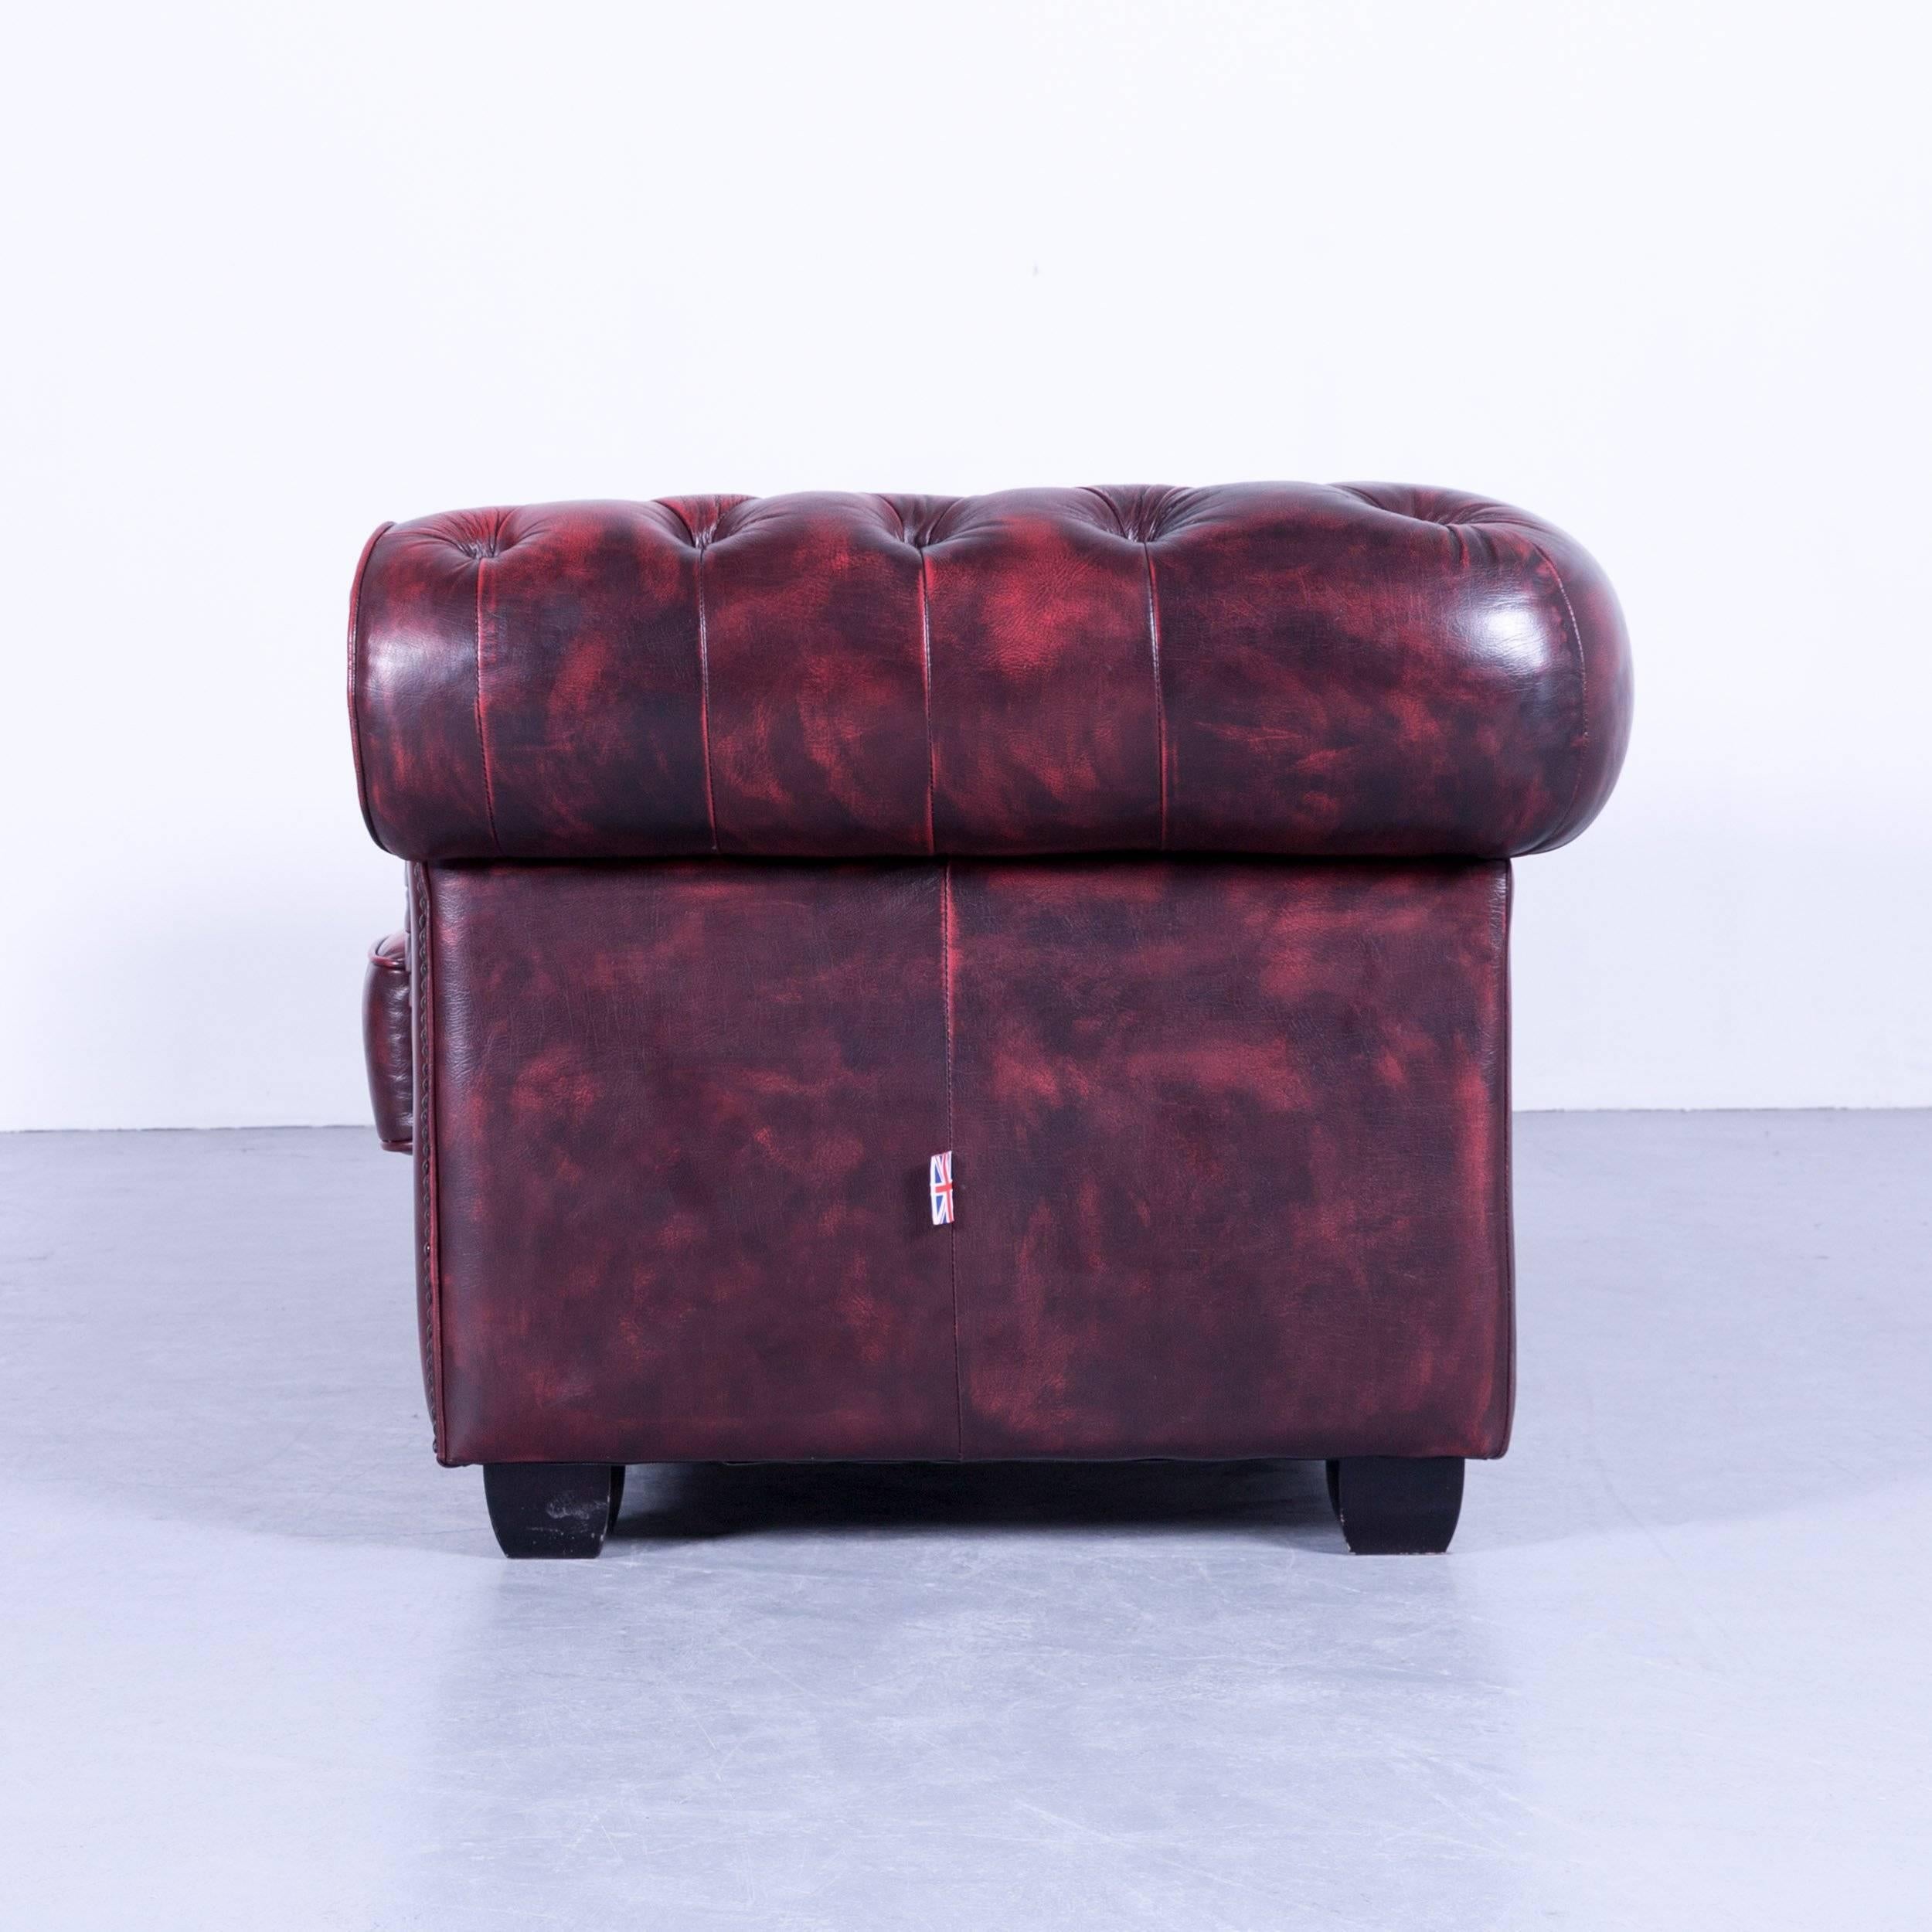 Leather Chesterfield Sofa Oxblood Red Three-Seat Couch Vintage Retro Handmade Rivets